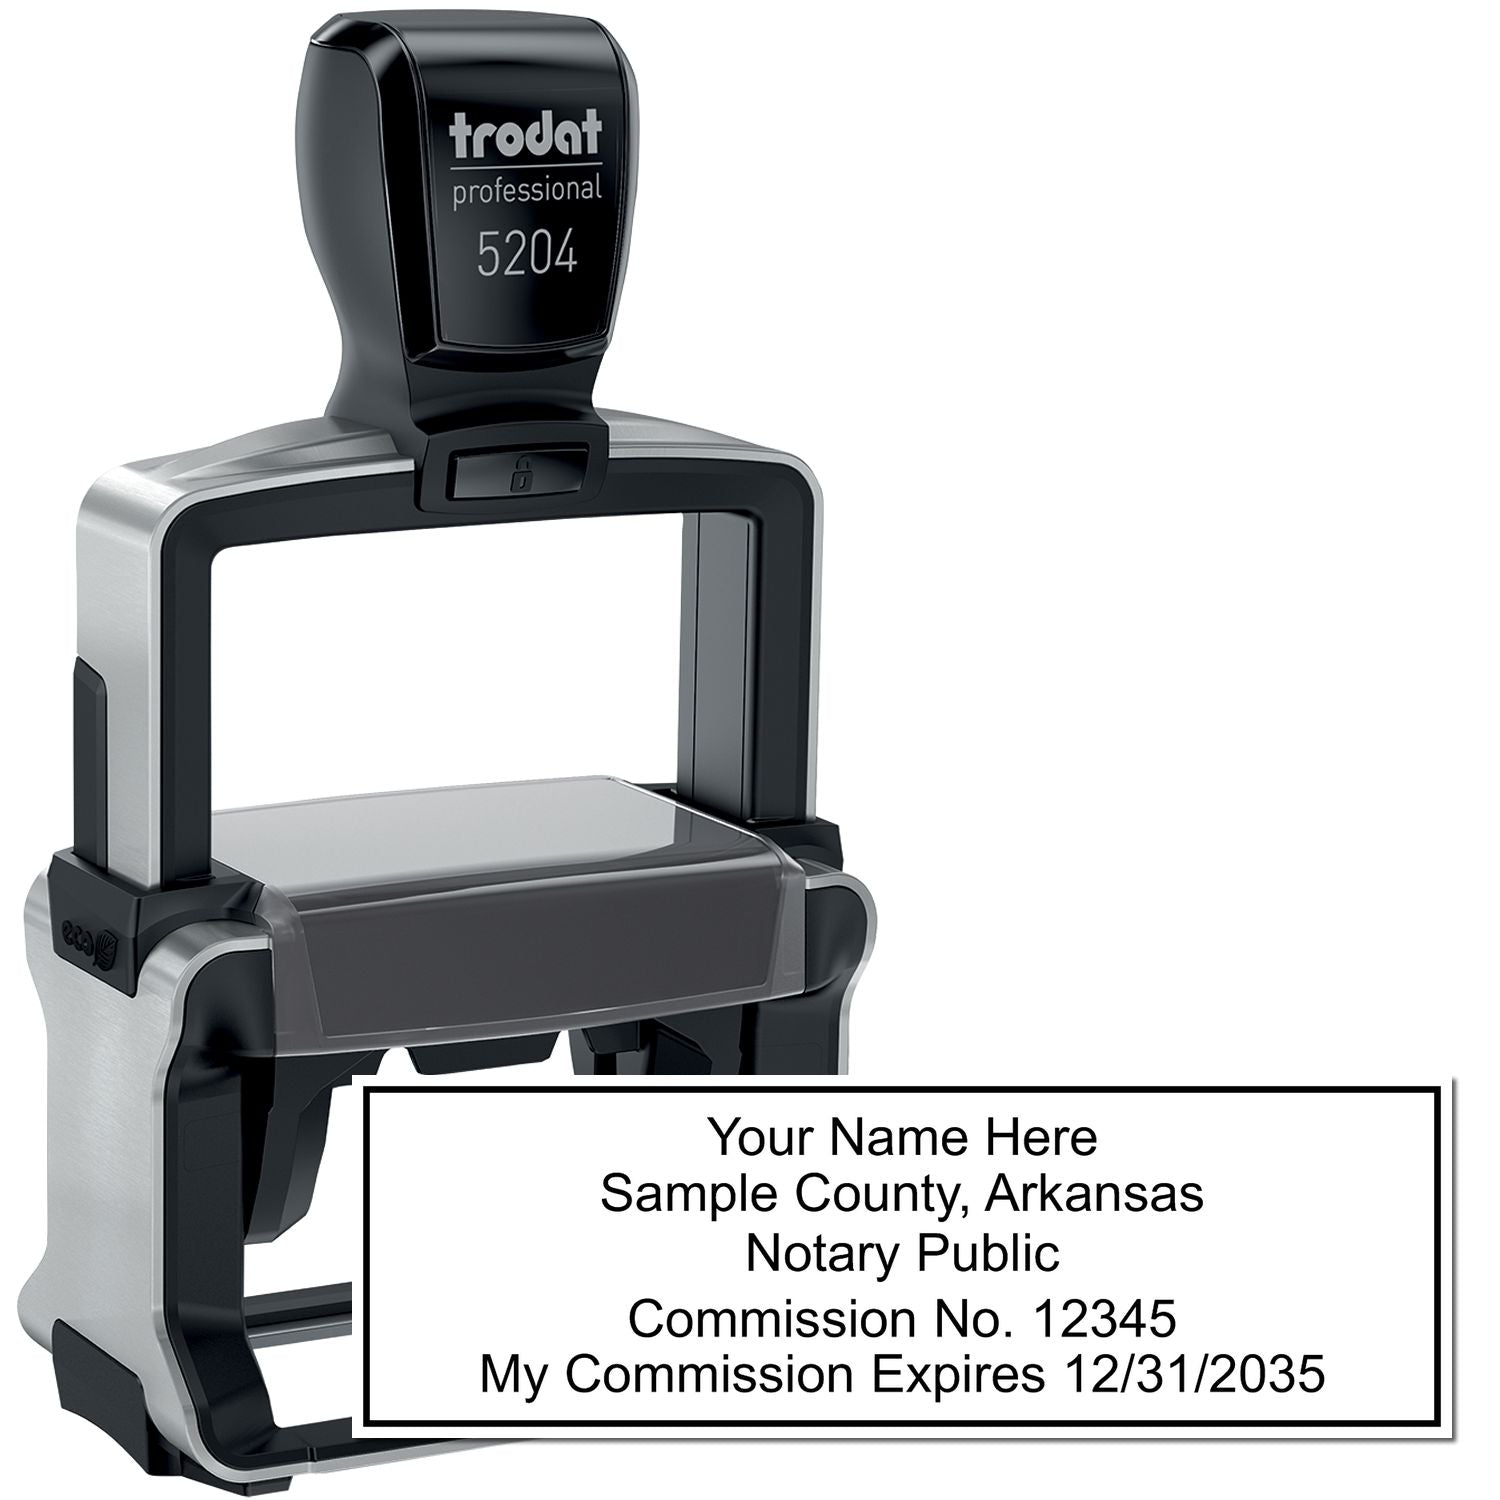 The main image for the Heavy-Duty Arkansas Rectangular Notary Stamp depicting a sample of the imprint and electronic files